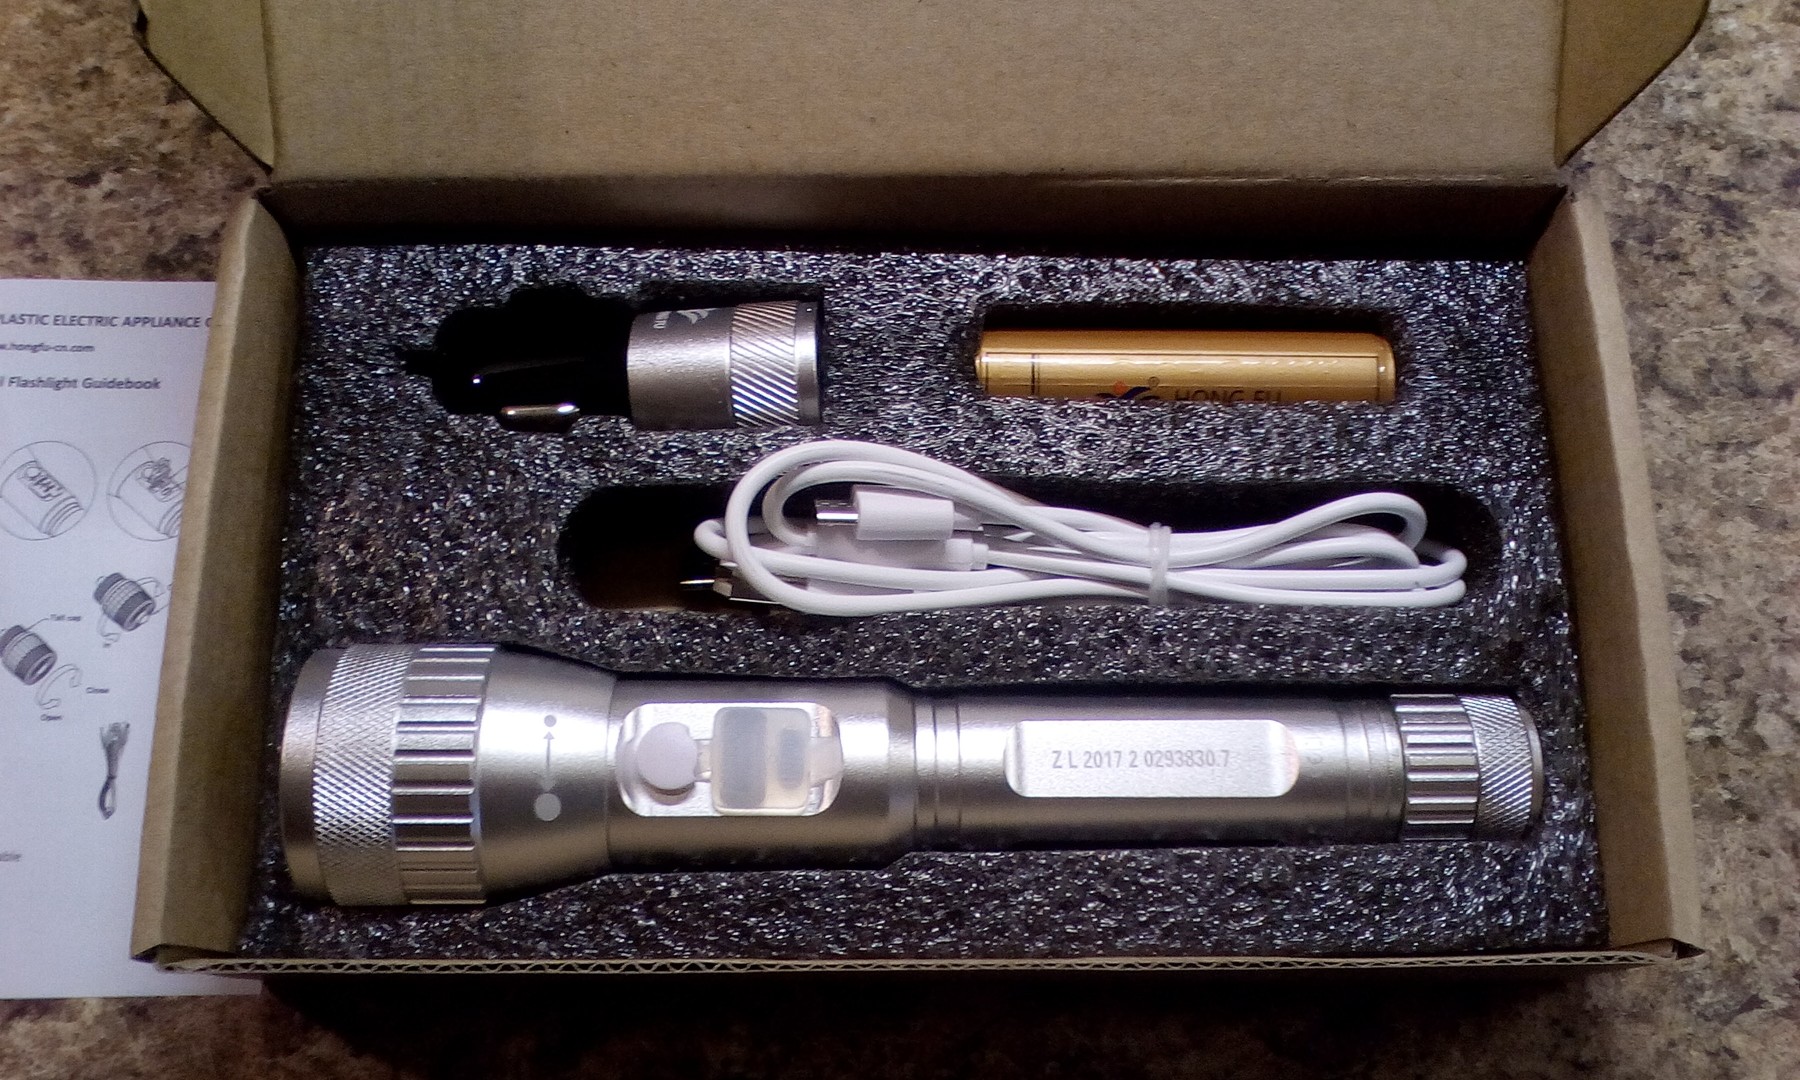 A Professional quality rechargeable flashlight